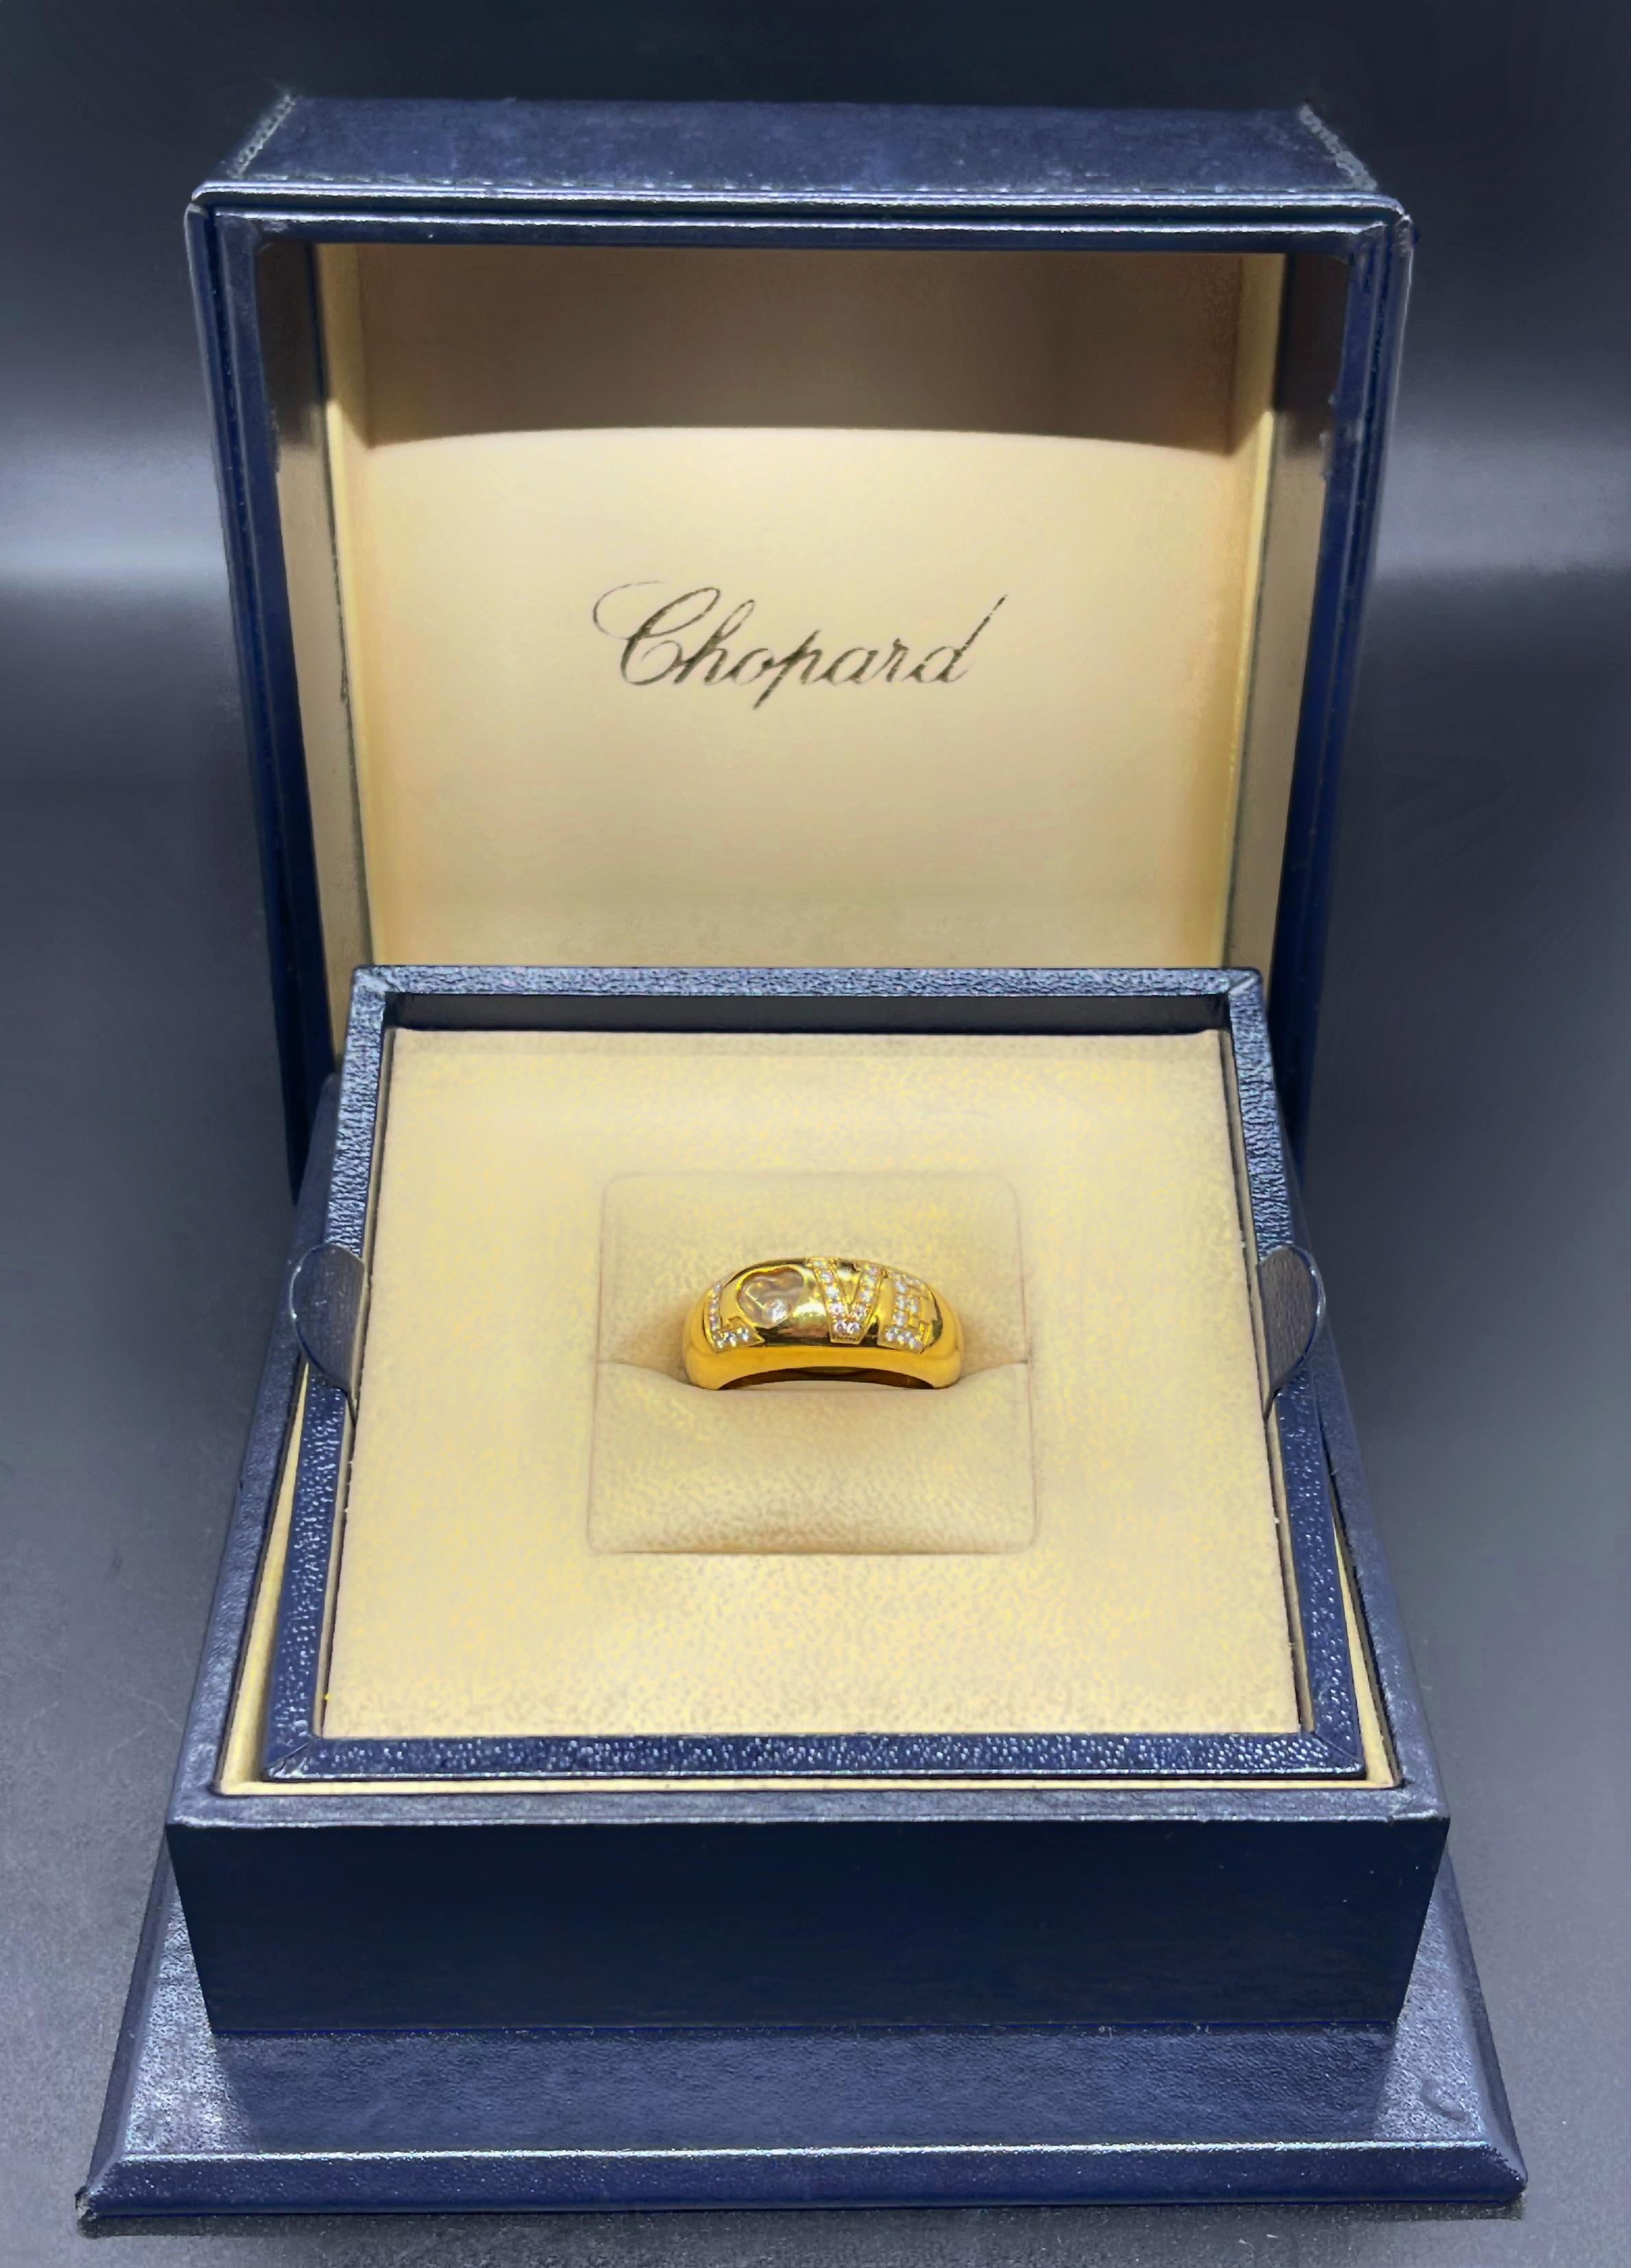 Chopard Happy diamonds Love ring. Crafted in  18K yellow gold. 24 round brilliant cut diamonds total an estimated 0.38 carats. The ring is stamped with a punch 750. 

The total weight: 11.1 grams.
EU size: 56
US size: 8

The ring can be resized on